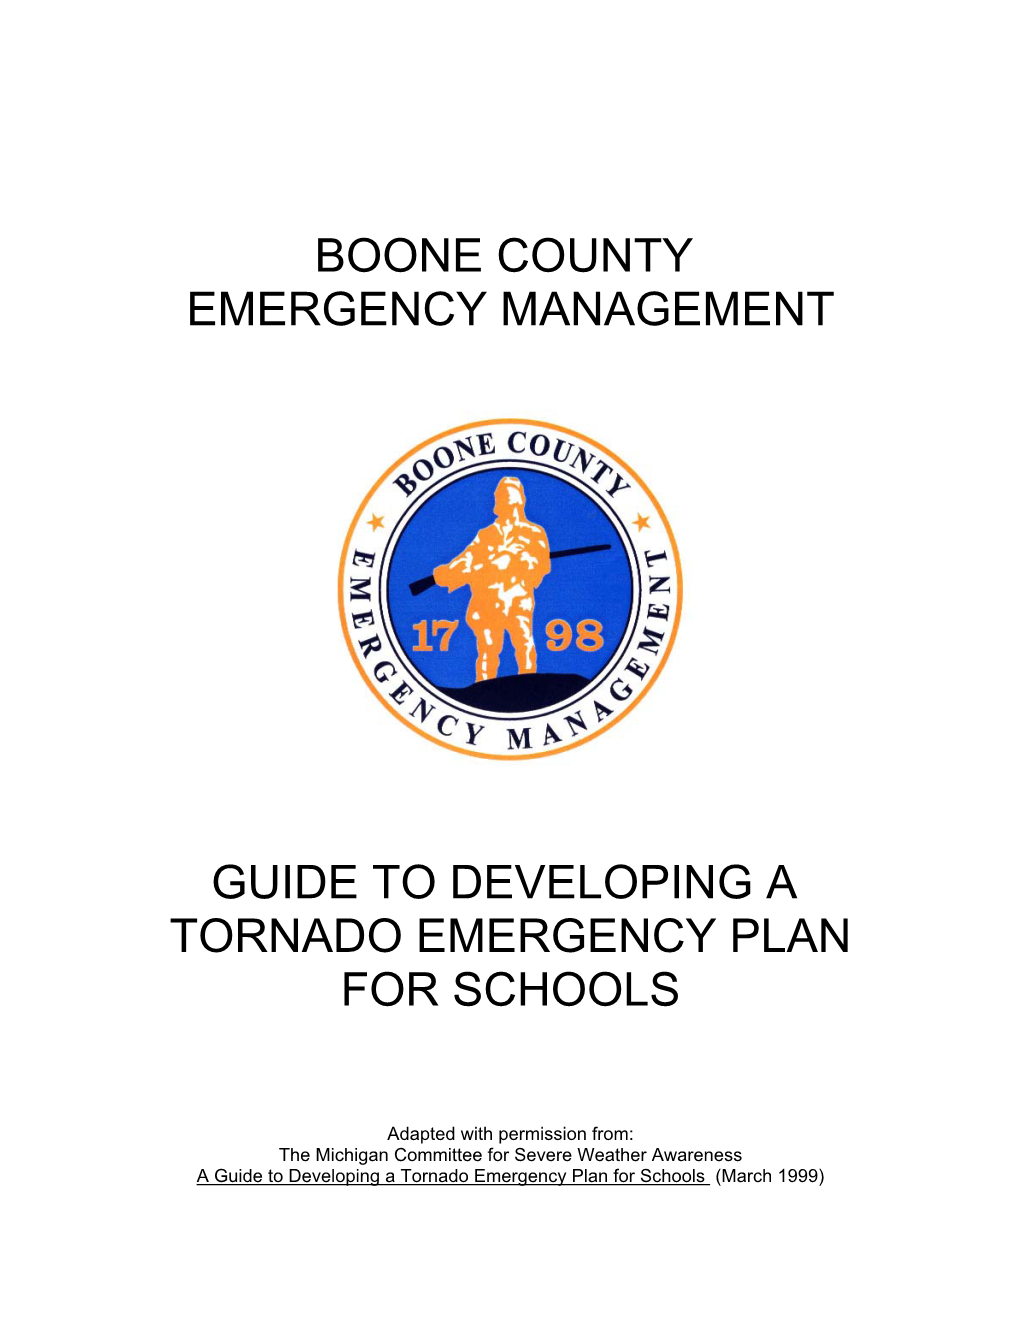 Guide to Developing a Tornado Emergency Plan for Schools